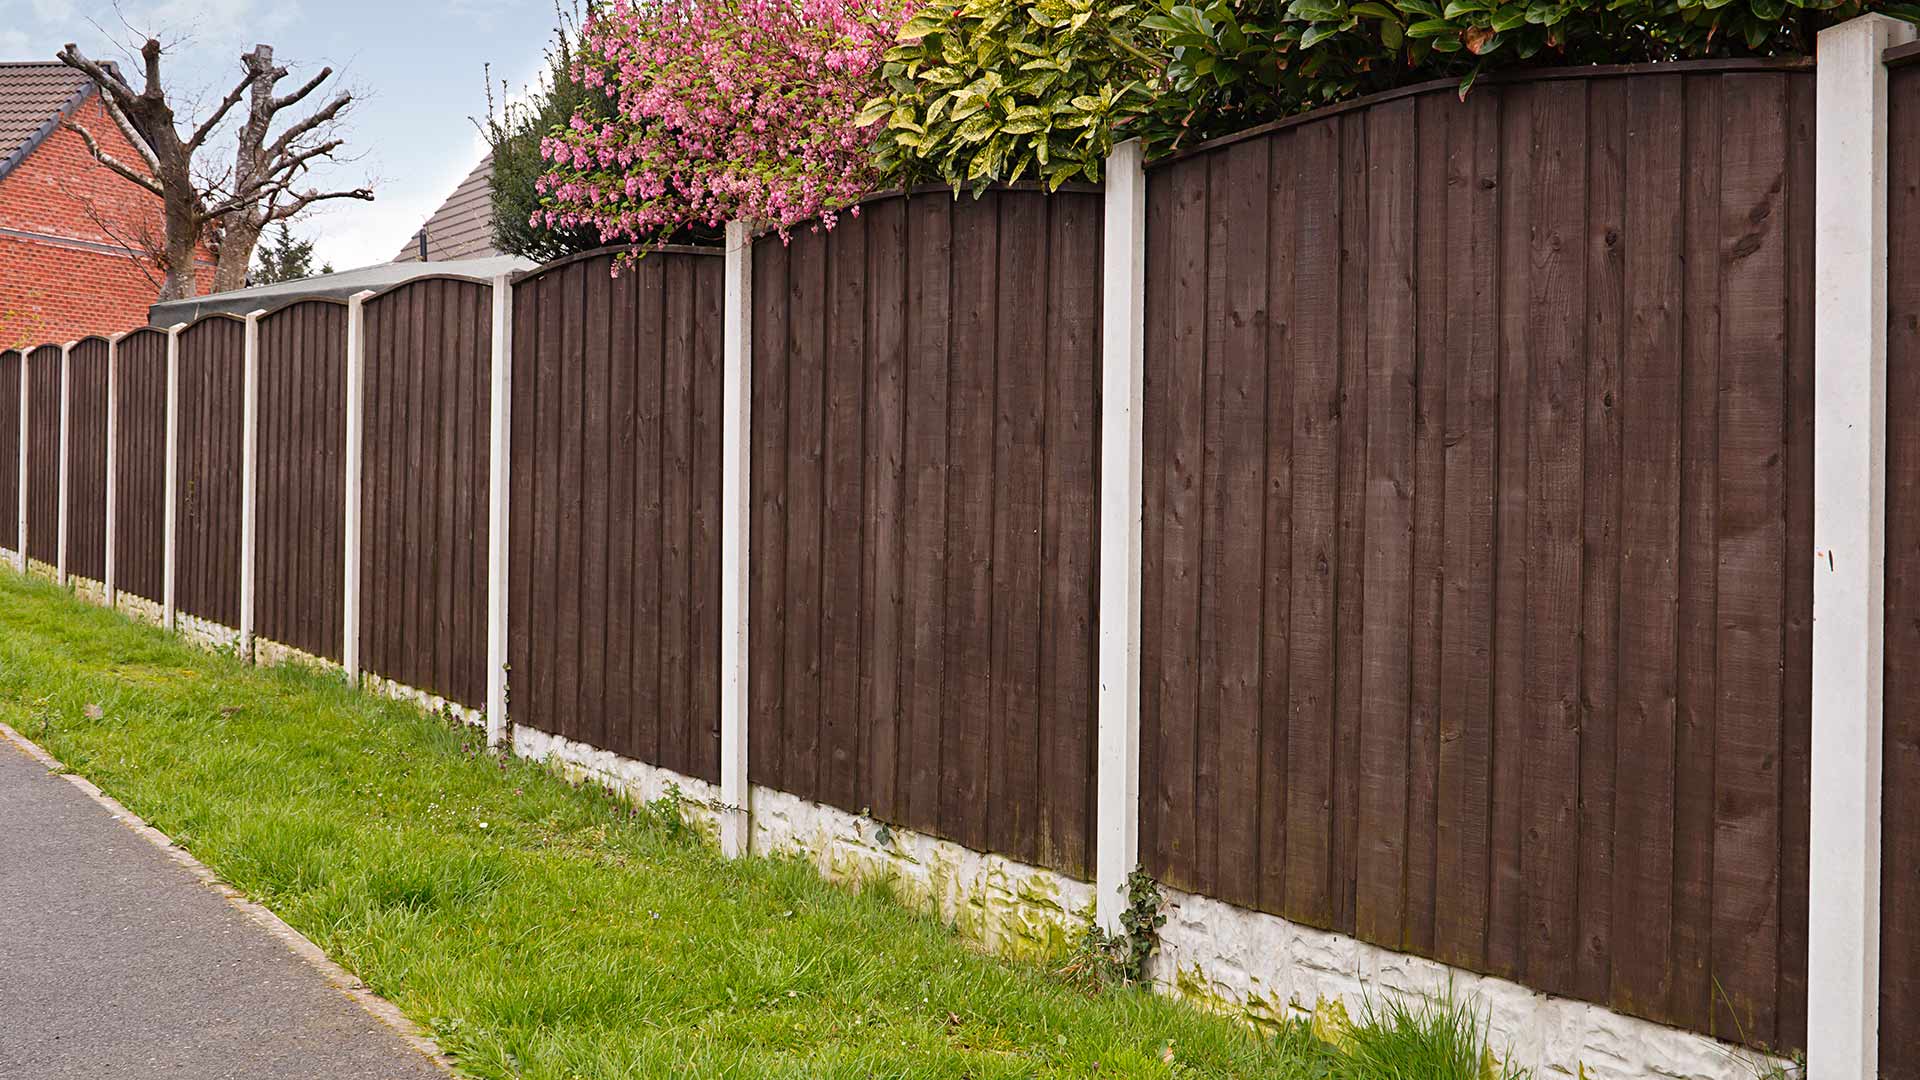 Fencing Options to Keep Your Yard Stylishly Secure | Today's Homeowner